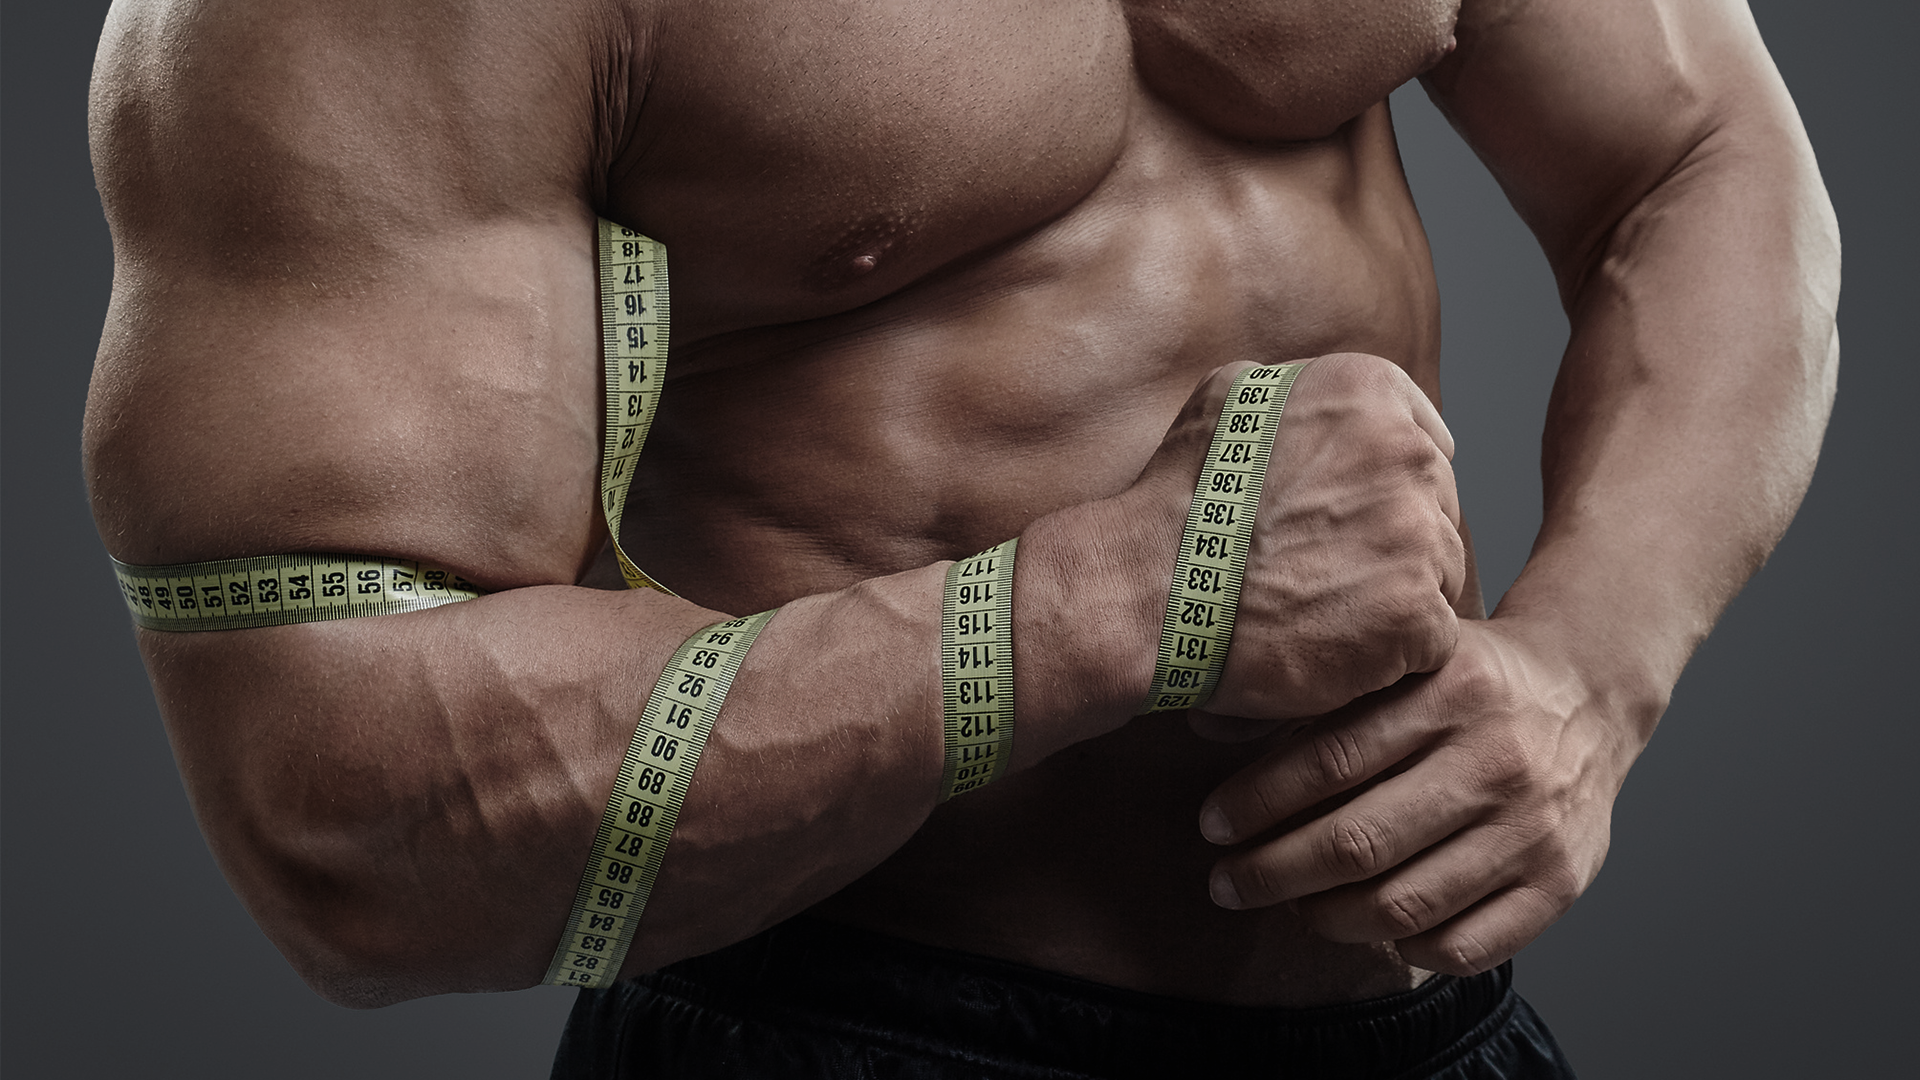 How to take body measurements like a bodybuilder